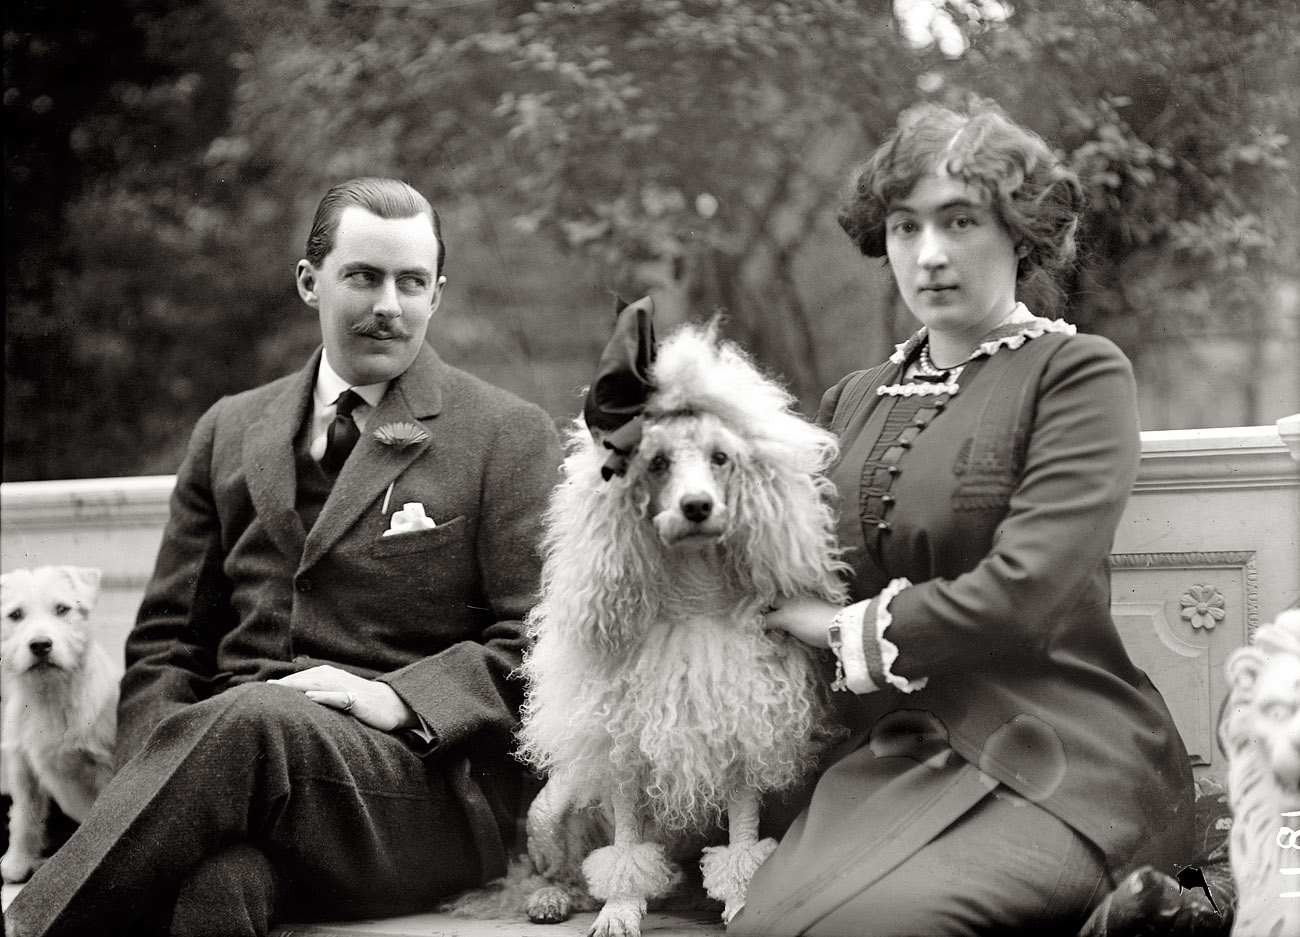 Washington, 1912. "Edward Beale McLean with Mrs. McLean." Edward (Ned) would become publisher of the Washington Post; his wife, the mining heiress Evalyn Walsh McLean, was the last private owner of the Hope Diamond. Their tempestuous union would be the fodder for countless headlines leading up to their divorce in 1929. Harris & Ewing Collection glass negative. View full size.